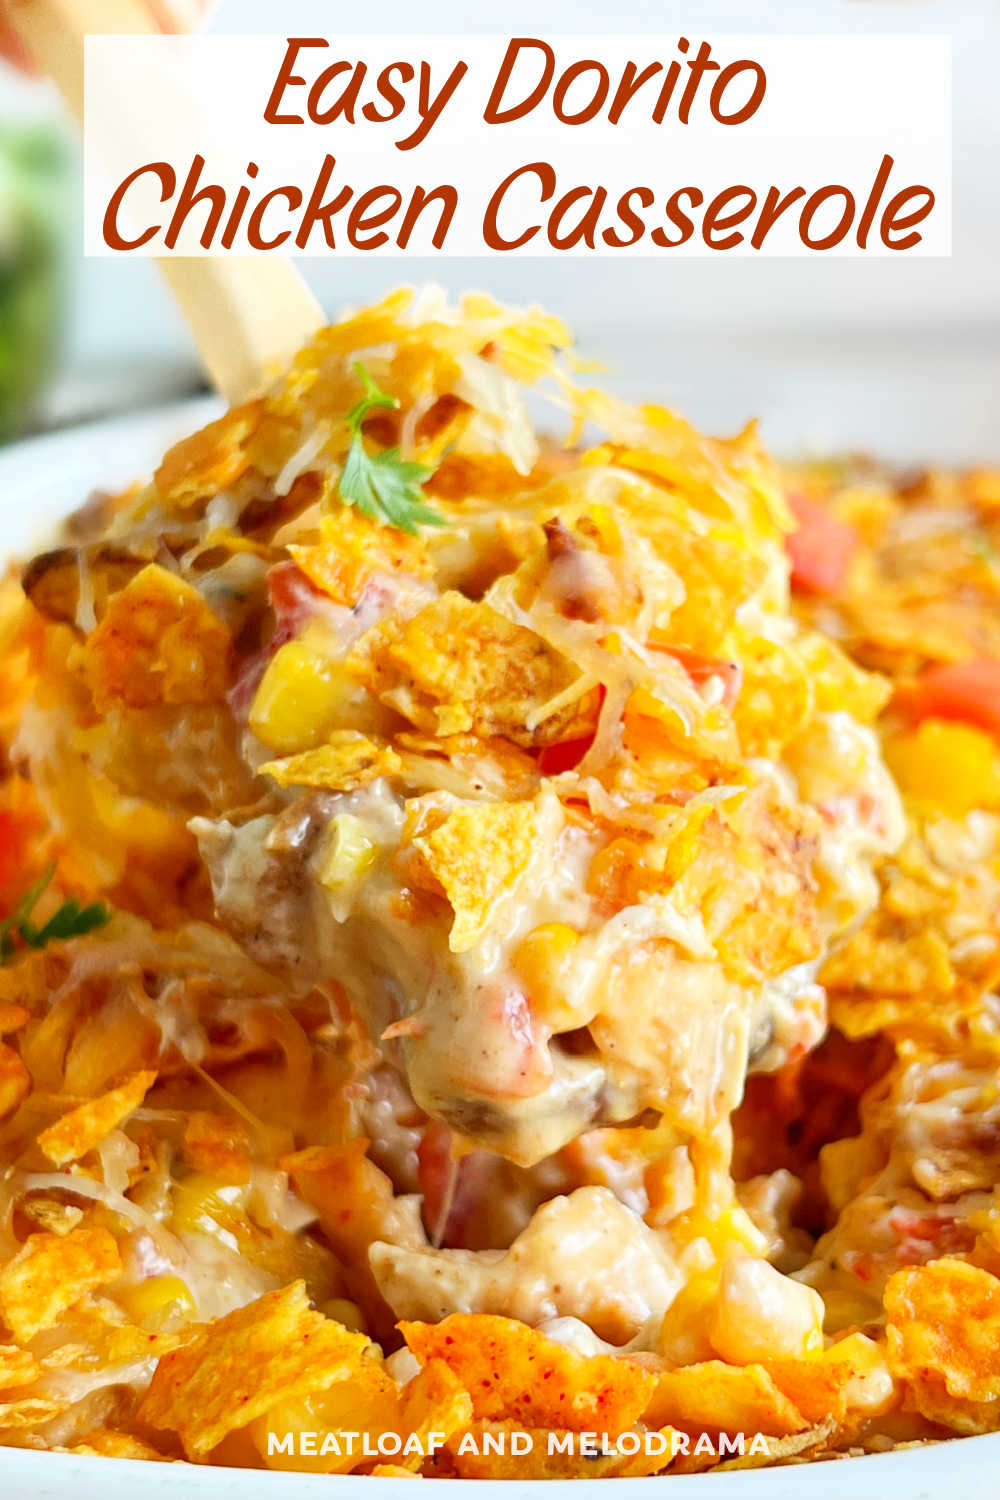 Dorito Chicken Casserole is an easy recipe made with rotisserie chicken, cheddar cheese and Doritos in a creamy sauce. A delicious casserole the whole family loves and perfect for a busy weeknight! via @meamel